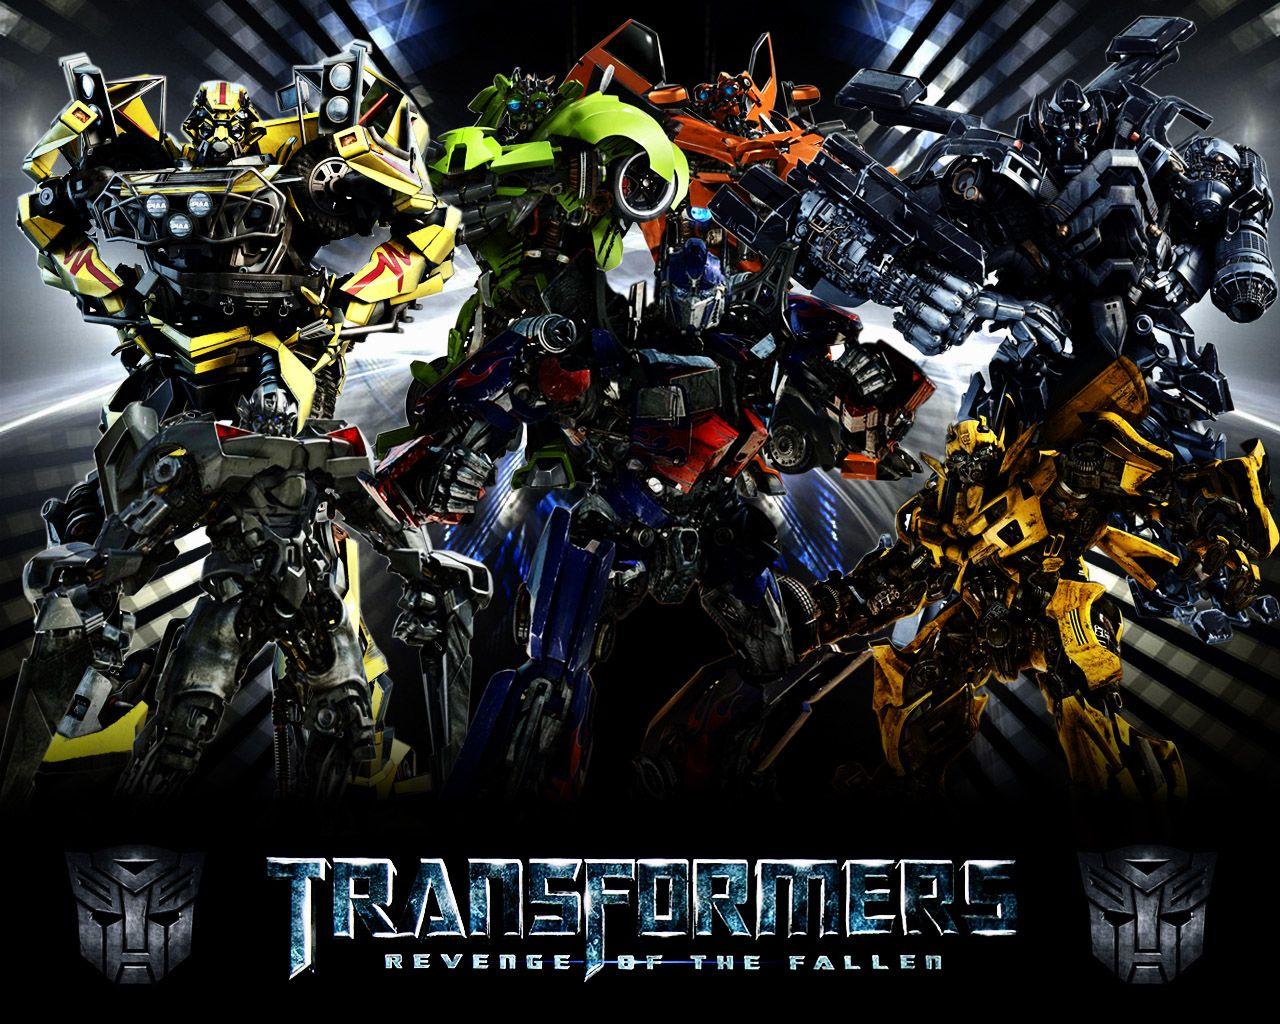 Autobot Wallpapers